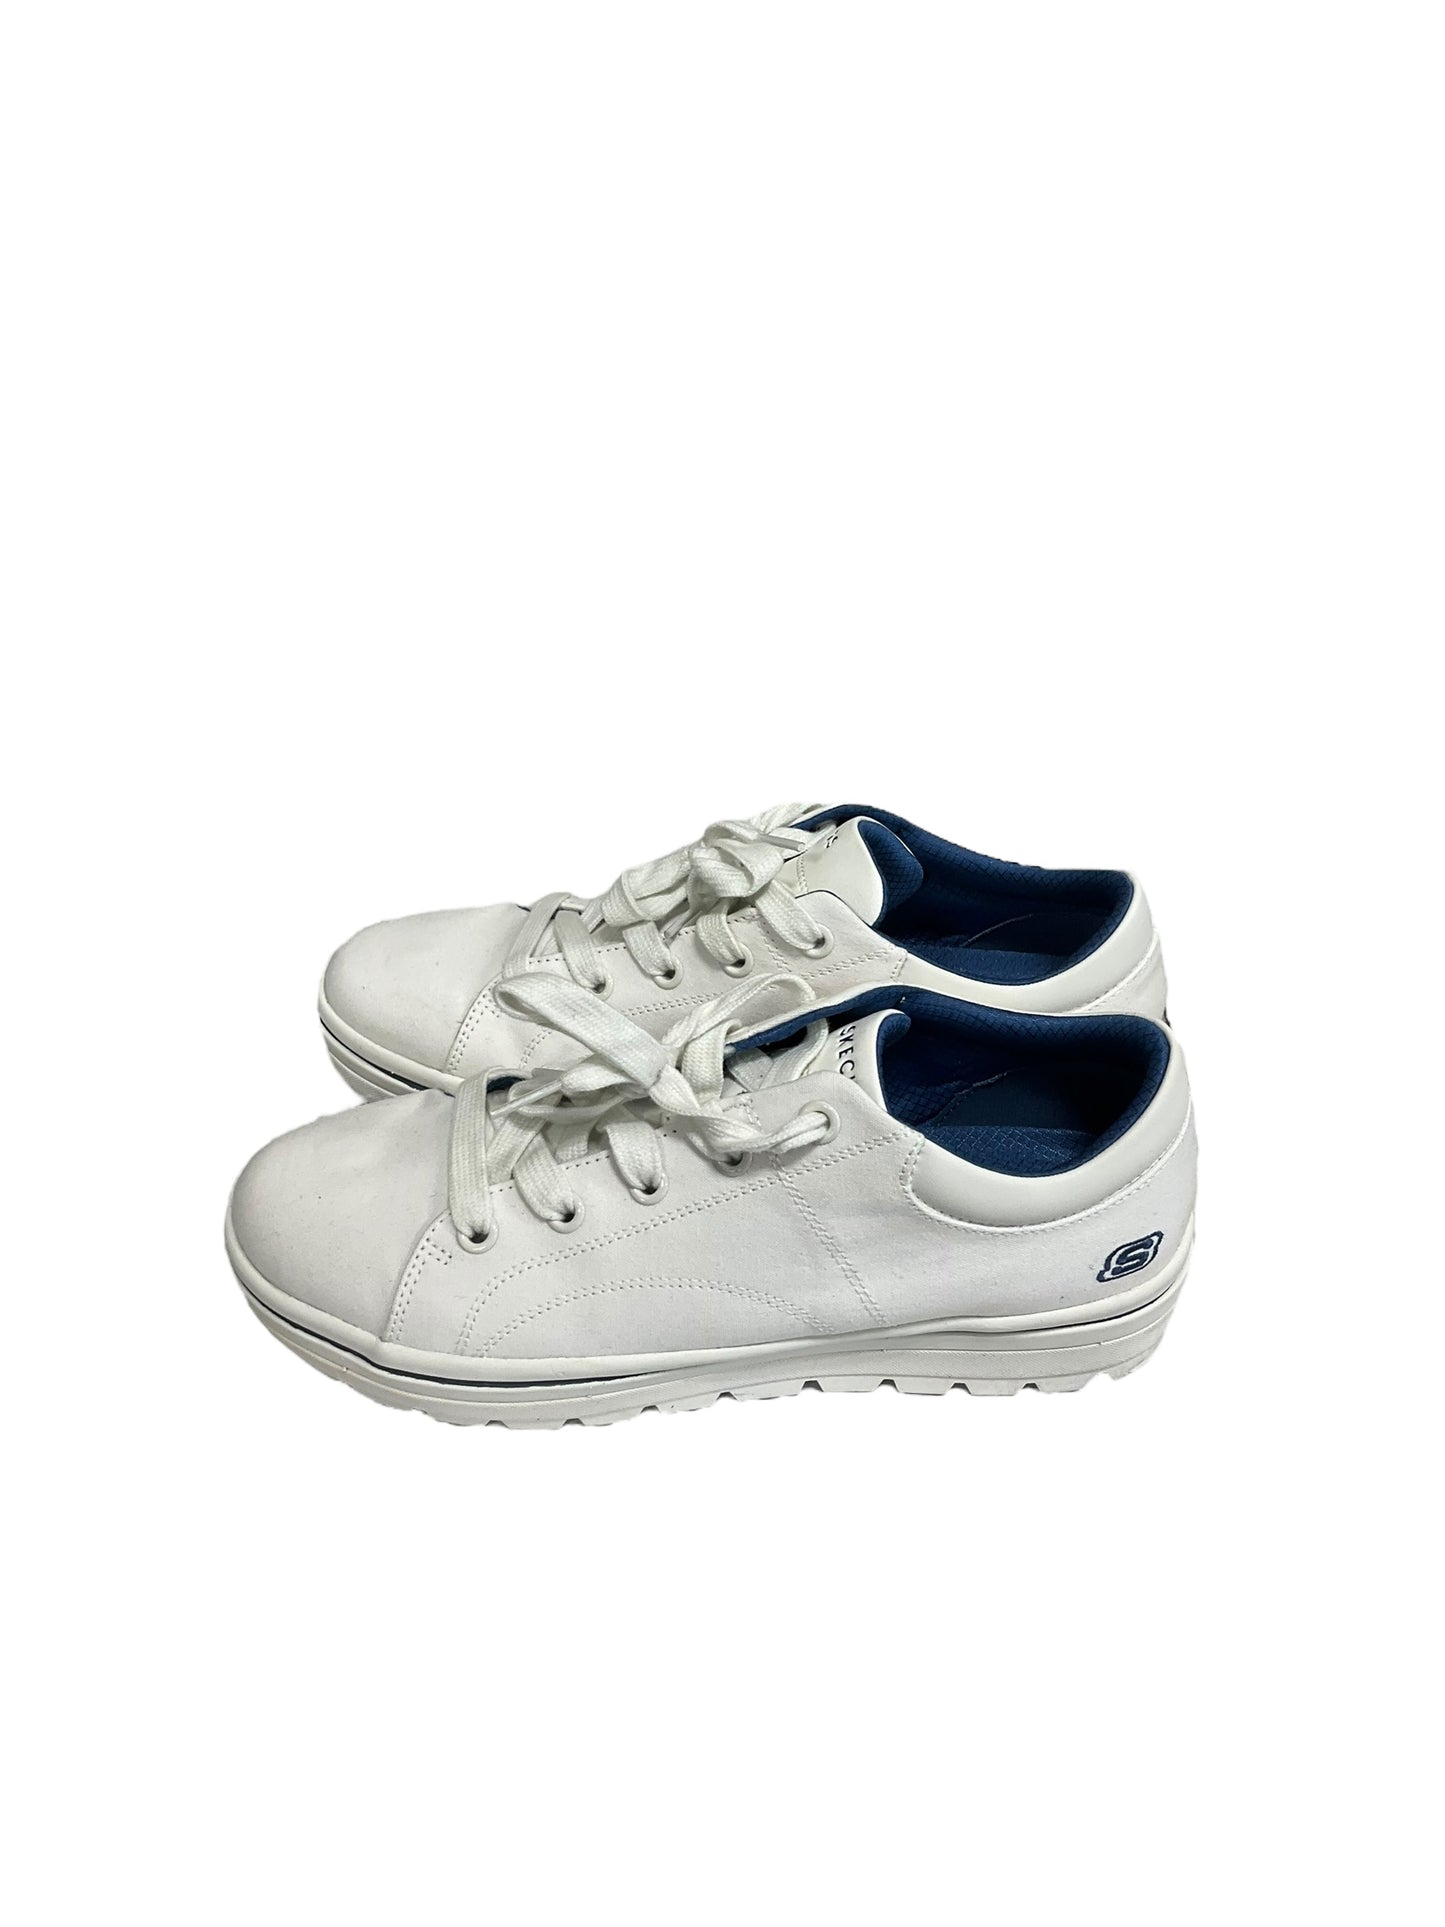 Shoes Athletic By Skechers  Size: 11